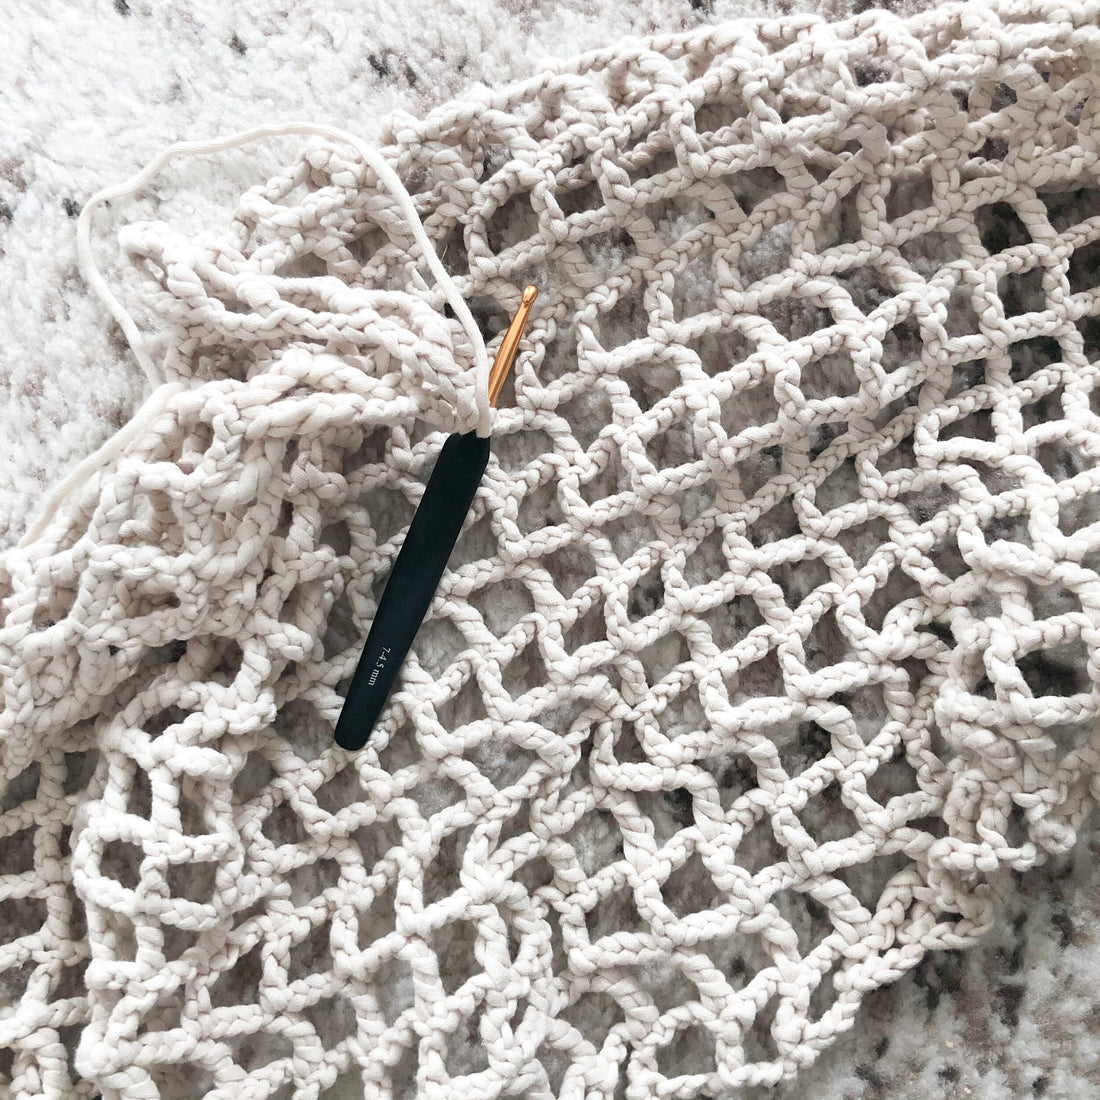 Learn to Crochet (11th May, 10am - 12.30pm. )